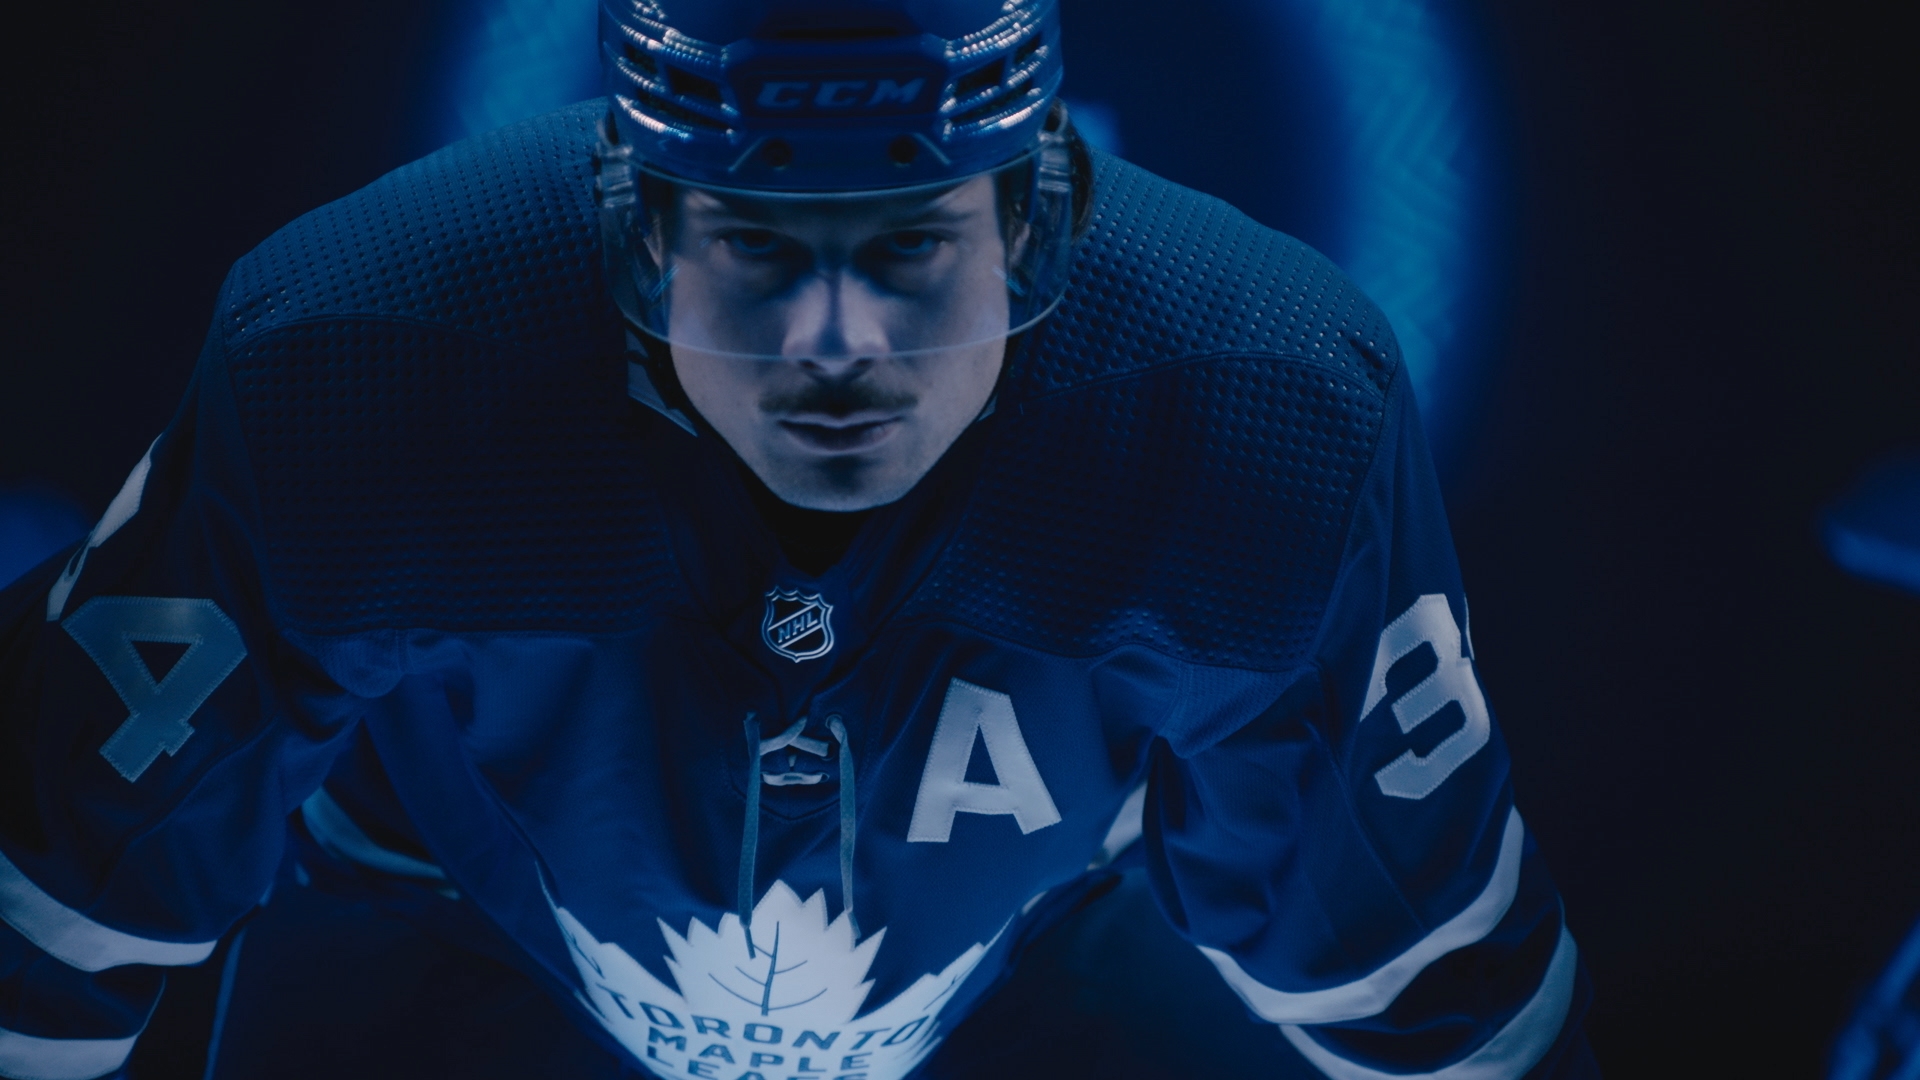 All or Nothing: Toronto Maple Leafs Playoff Habits (TV Episode